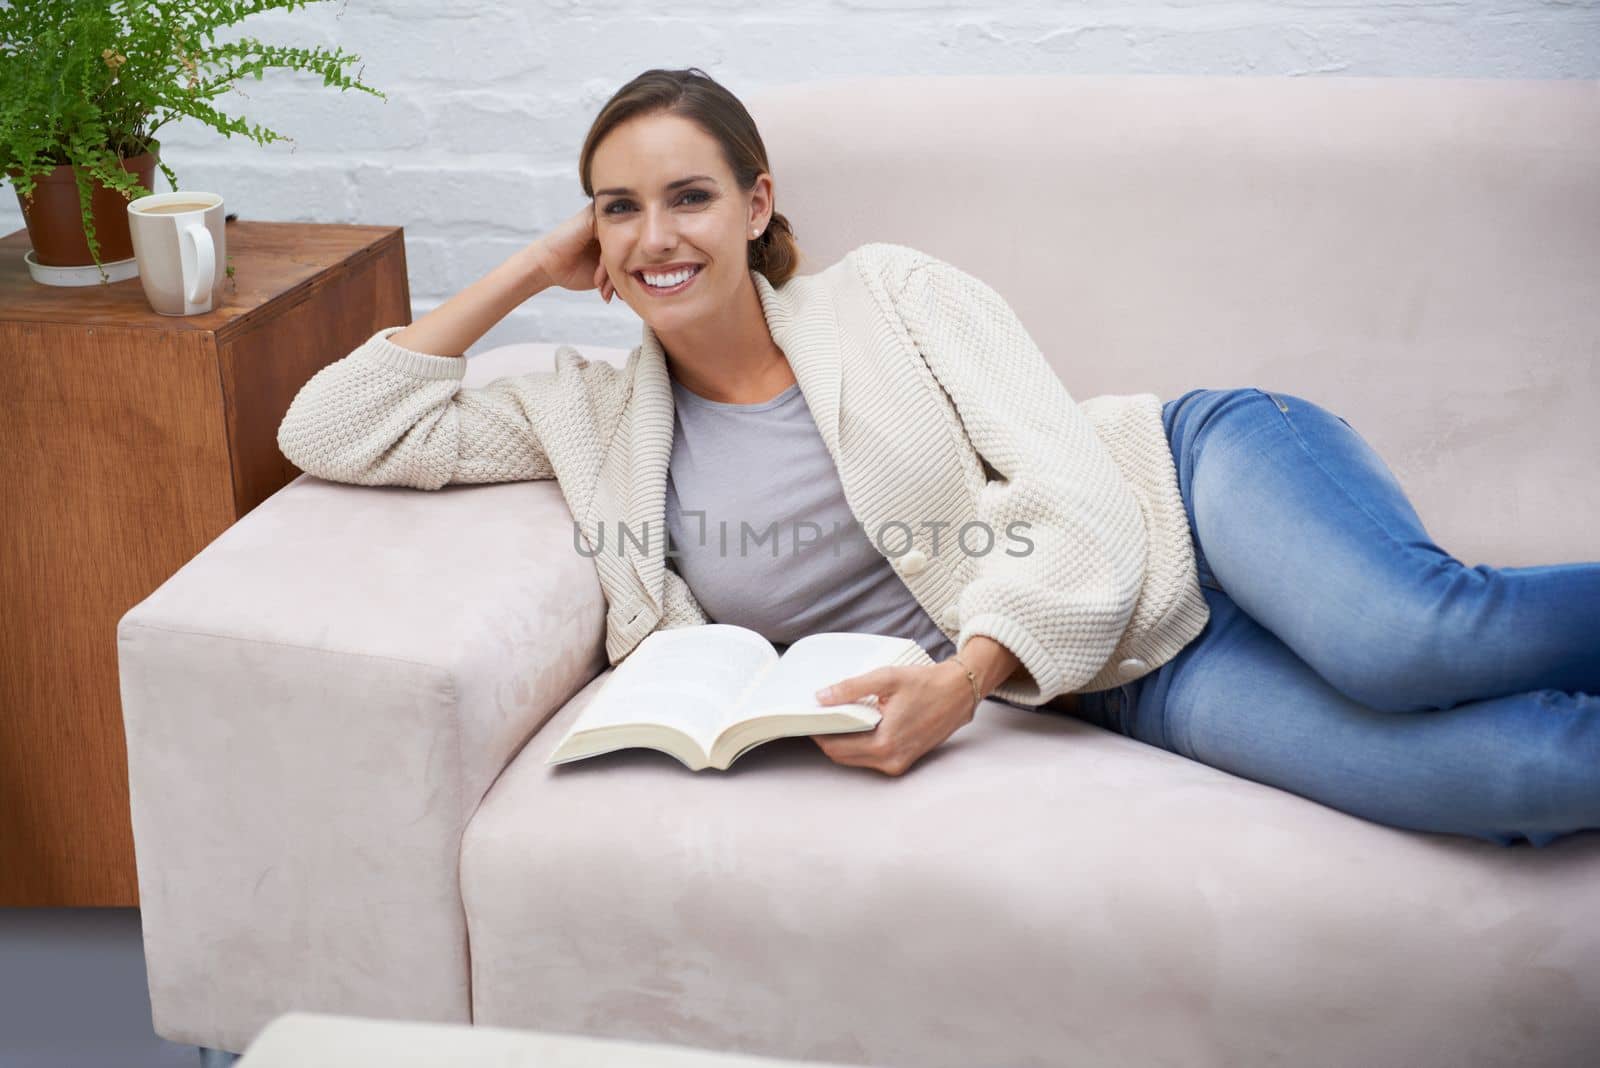 Making the most of her time off. an attractive young woman relaxing on the sofa at home